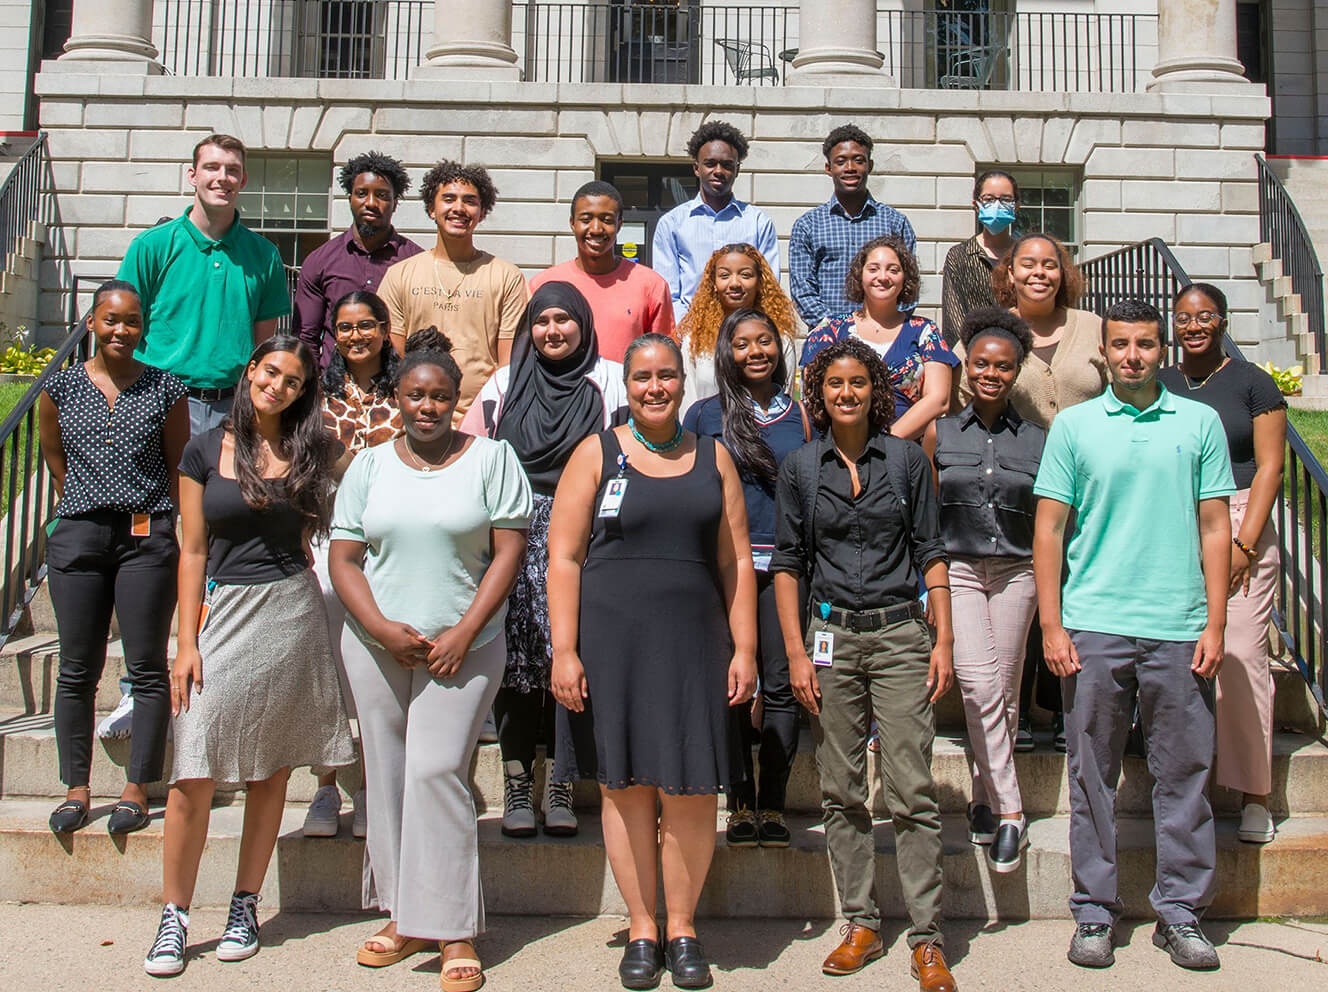 Youth Neurology Education and Research Program director Dr. Nicte Mejia, MD (front center), with high school and undergraduate student interns who spent the summer working and learning alongside neuroscientists at Mass General.